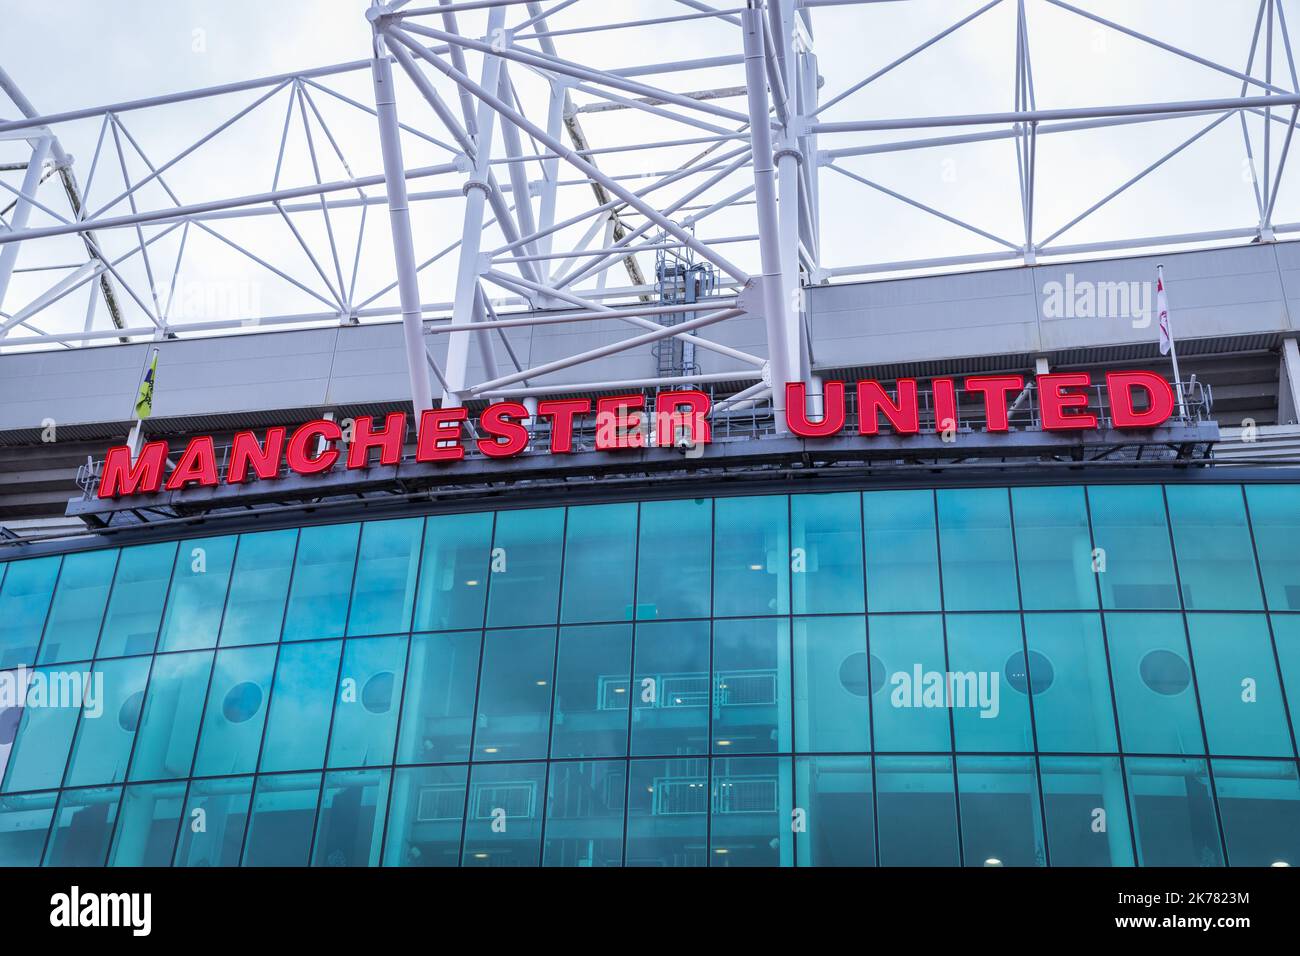 Facade of Old Trafford stadium with Manchester United's name Stock Photo